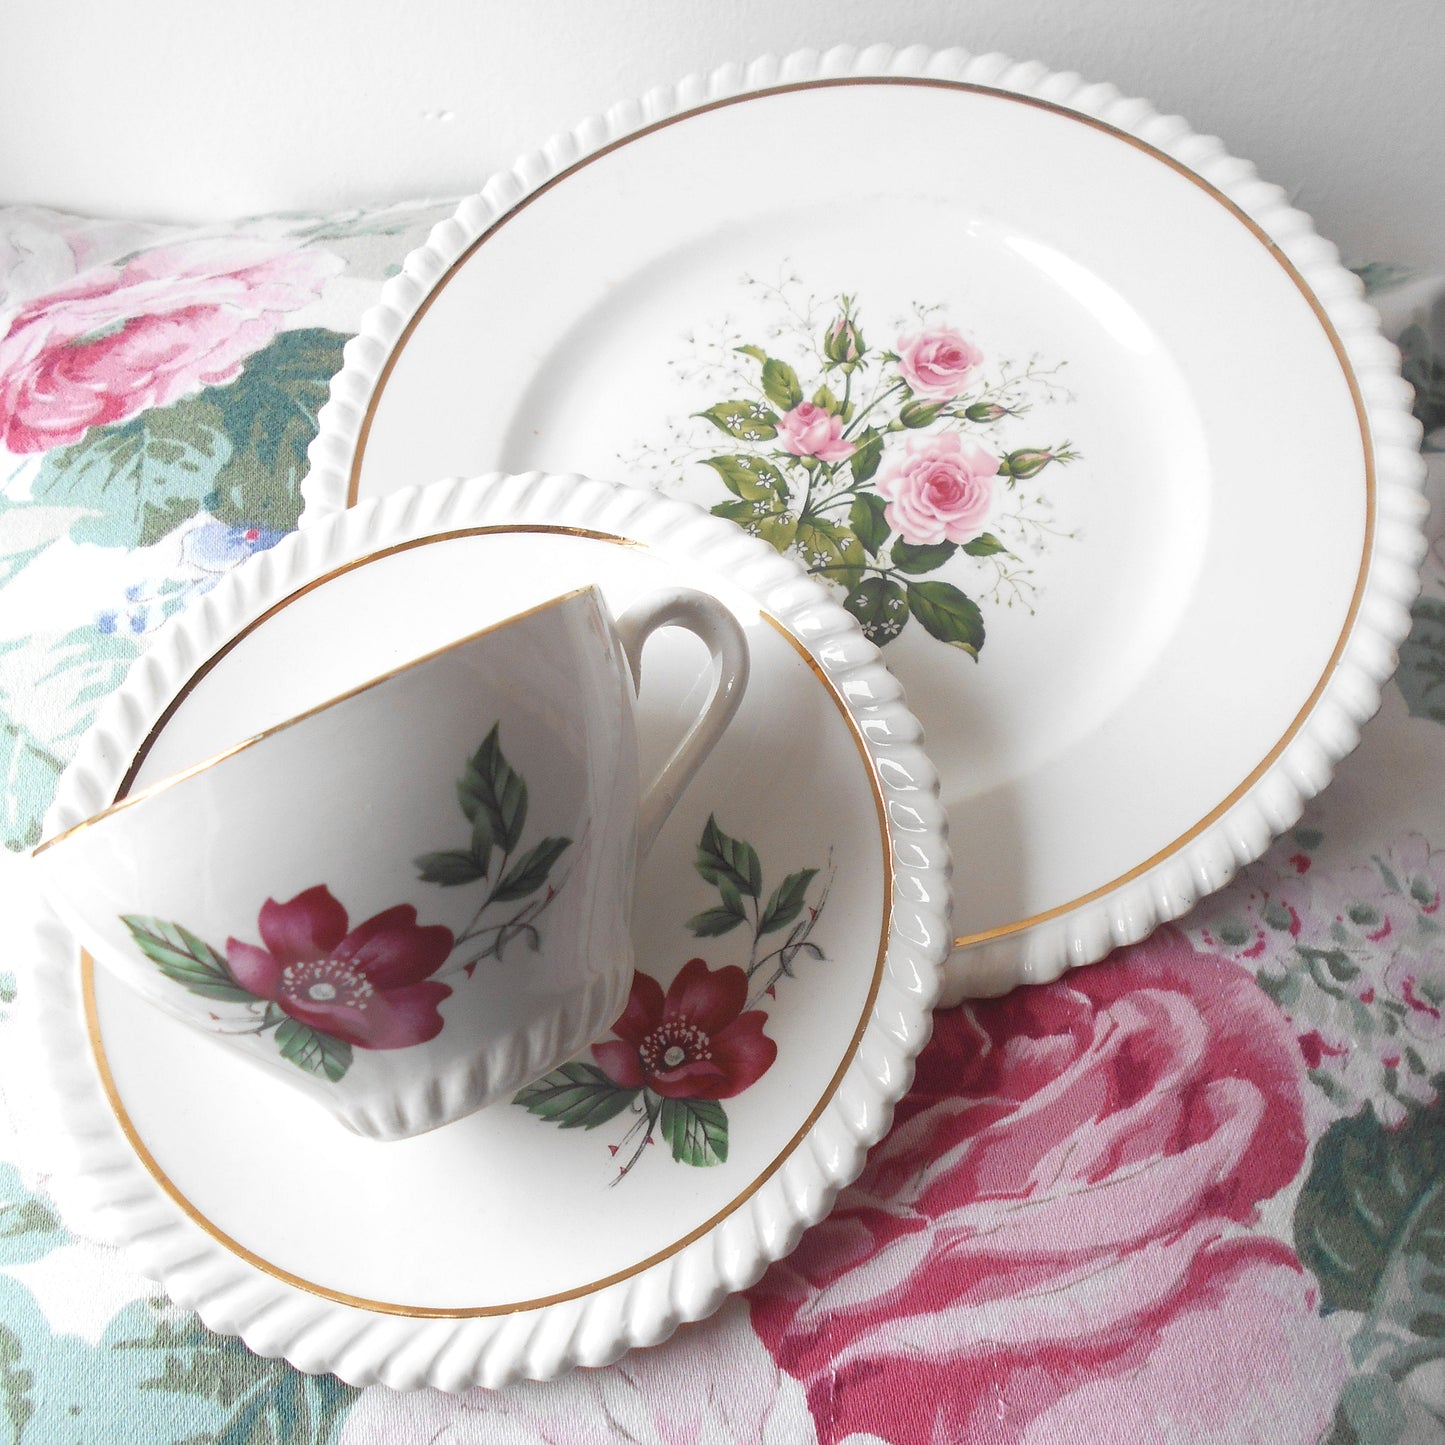 Lunéville Faience Tea Cup Trio. Mismatched Tea Cup, Saucer & Plate Set. from Tiggy & Pip - €49.00! Shop now at Tiggy and Pip